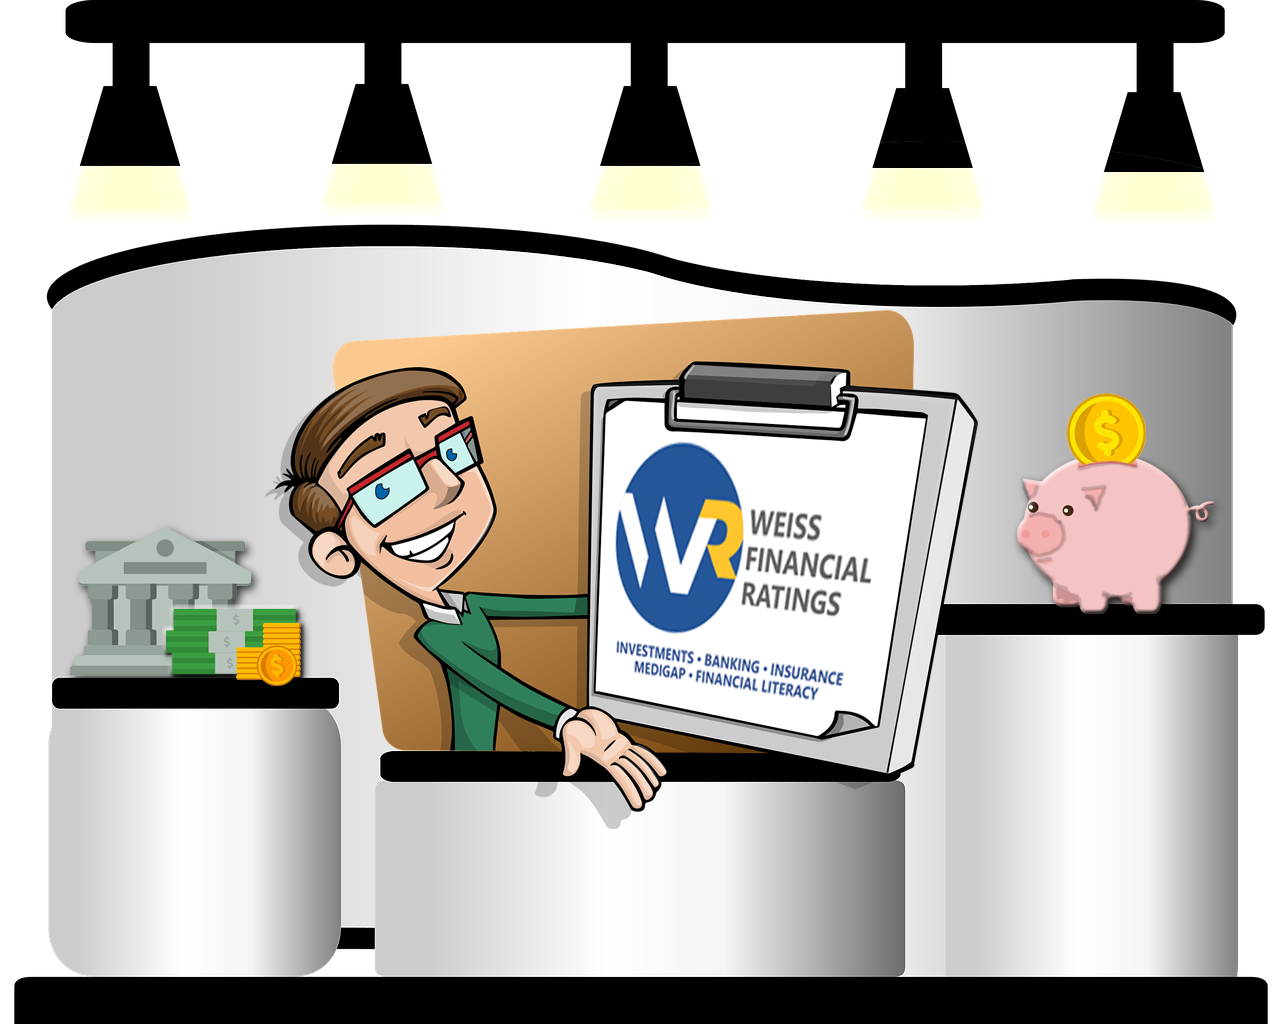 Weiss Financial Ratings is a new resource available to SFPL cardholders through AVL.